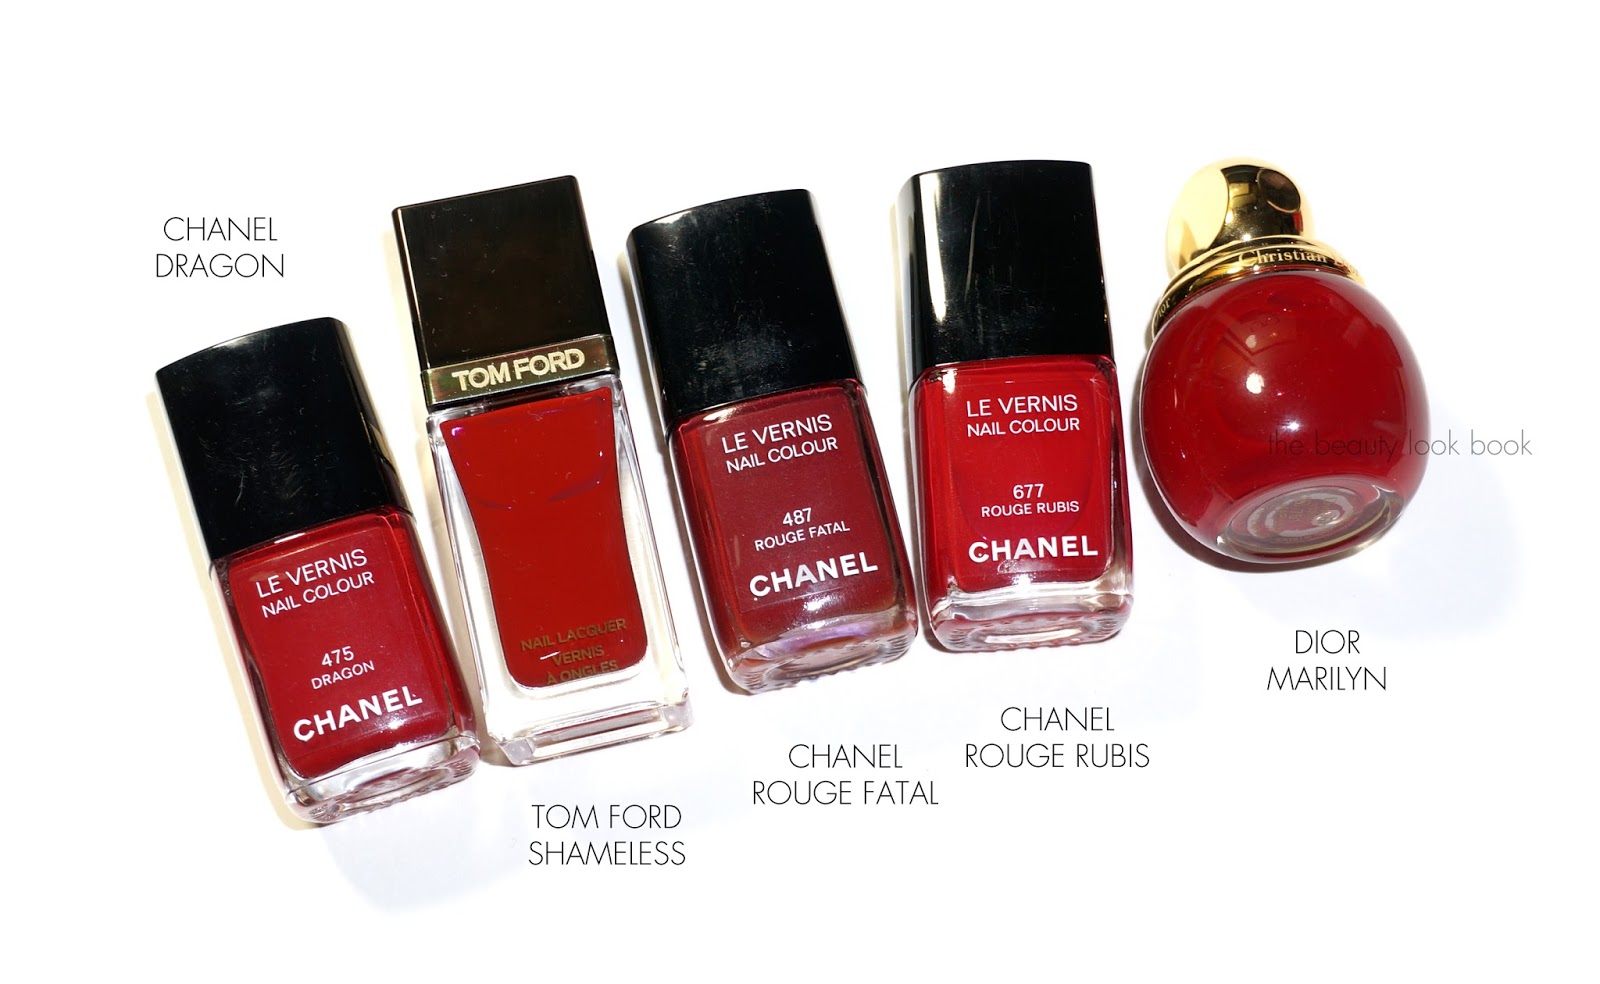 Tom Ford Shameless Nail Lacquer Comparisons | The Beauty Look Book